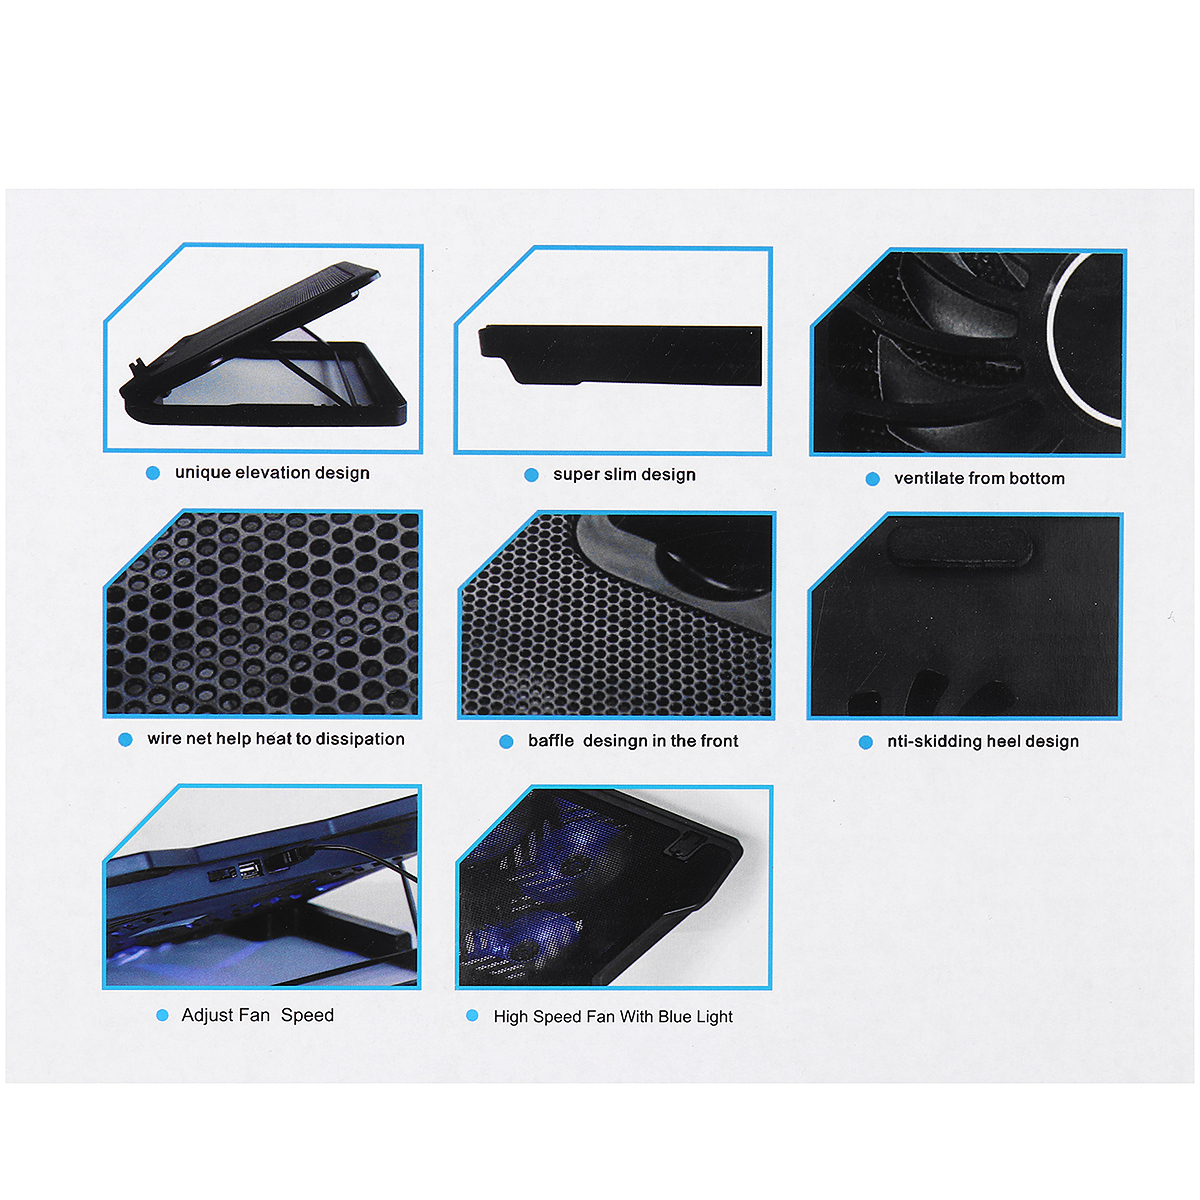 4 Fan Adjustable Laptop Cooling Pad Cooler Portable Stand For 14-17inch Laptop